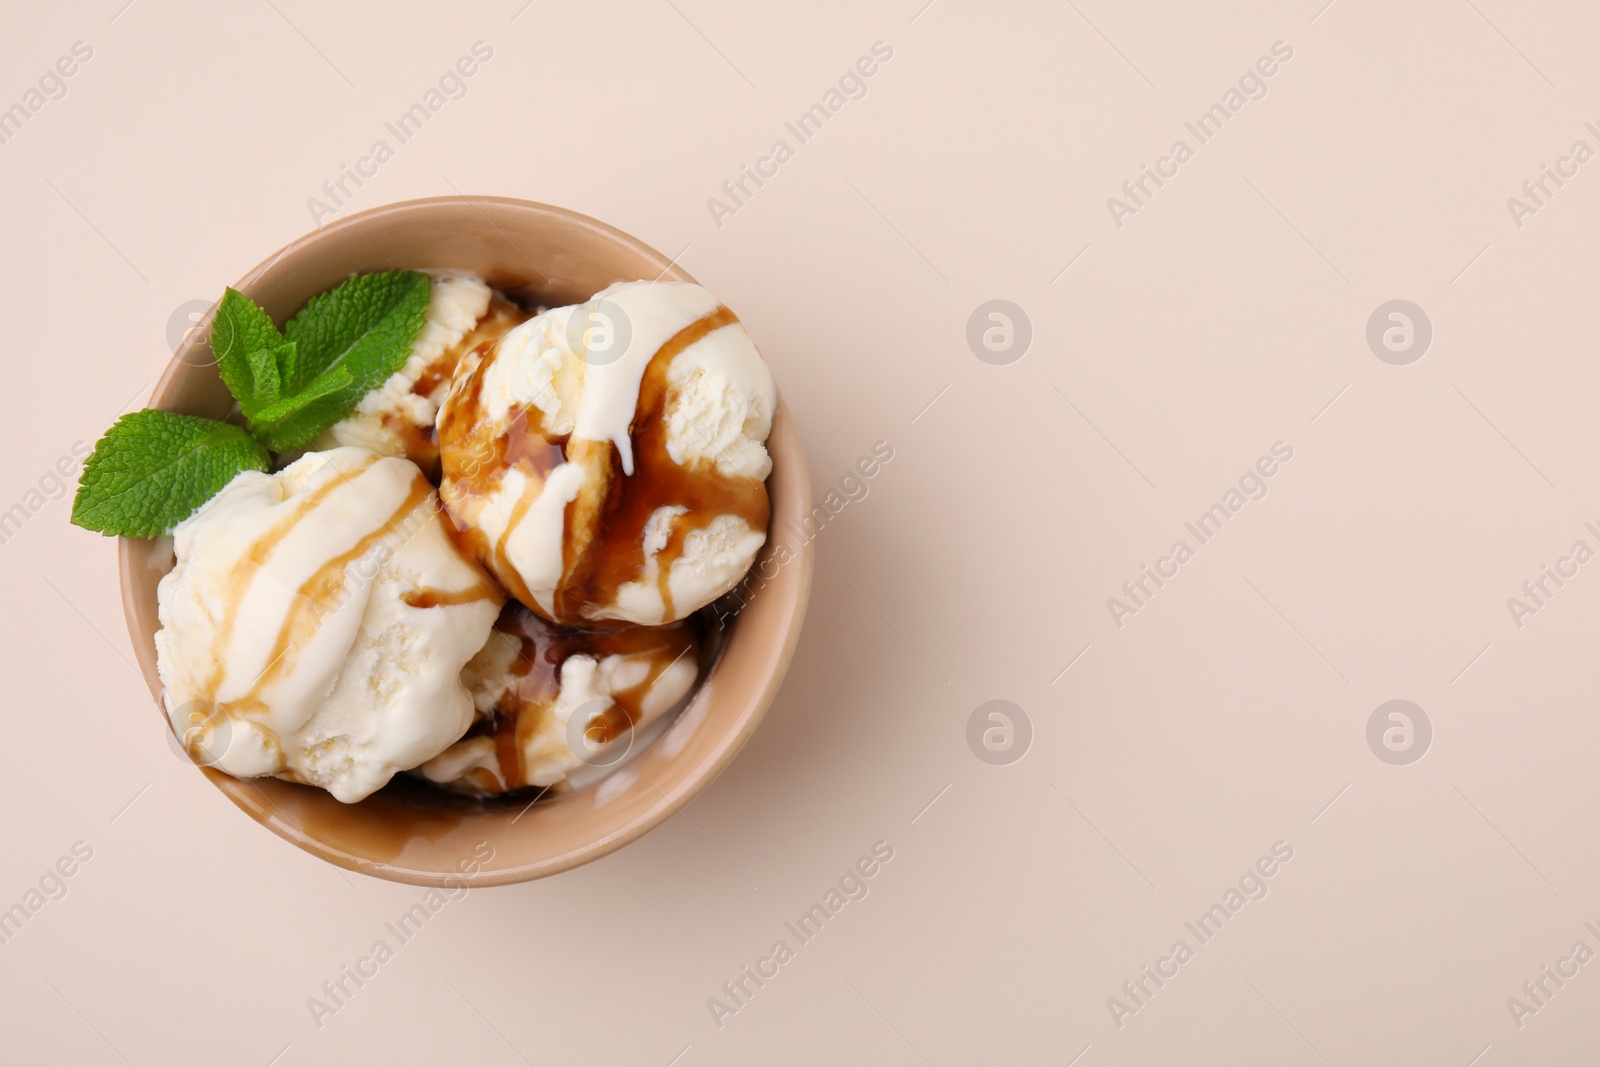 Photo of Scoops of ice cream with caramel sauce and mint leaves on beige table, top view. Space for text